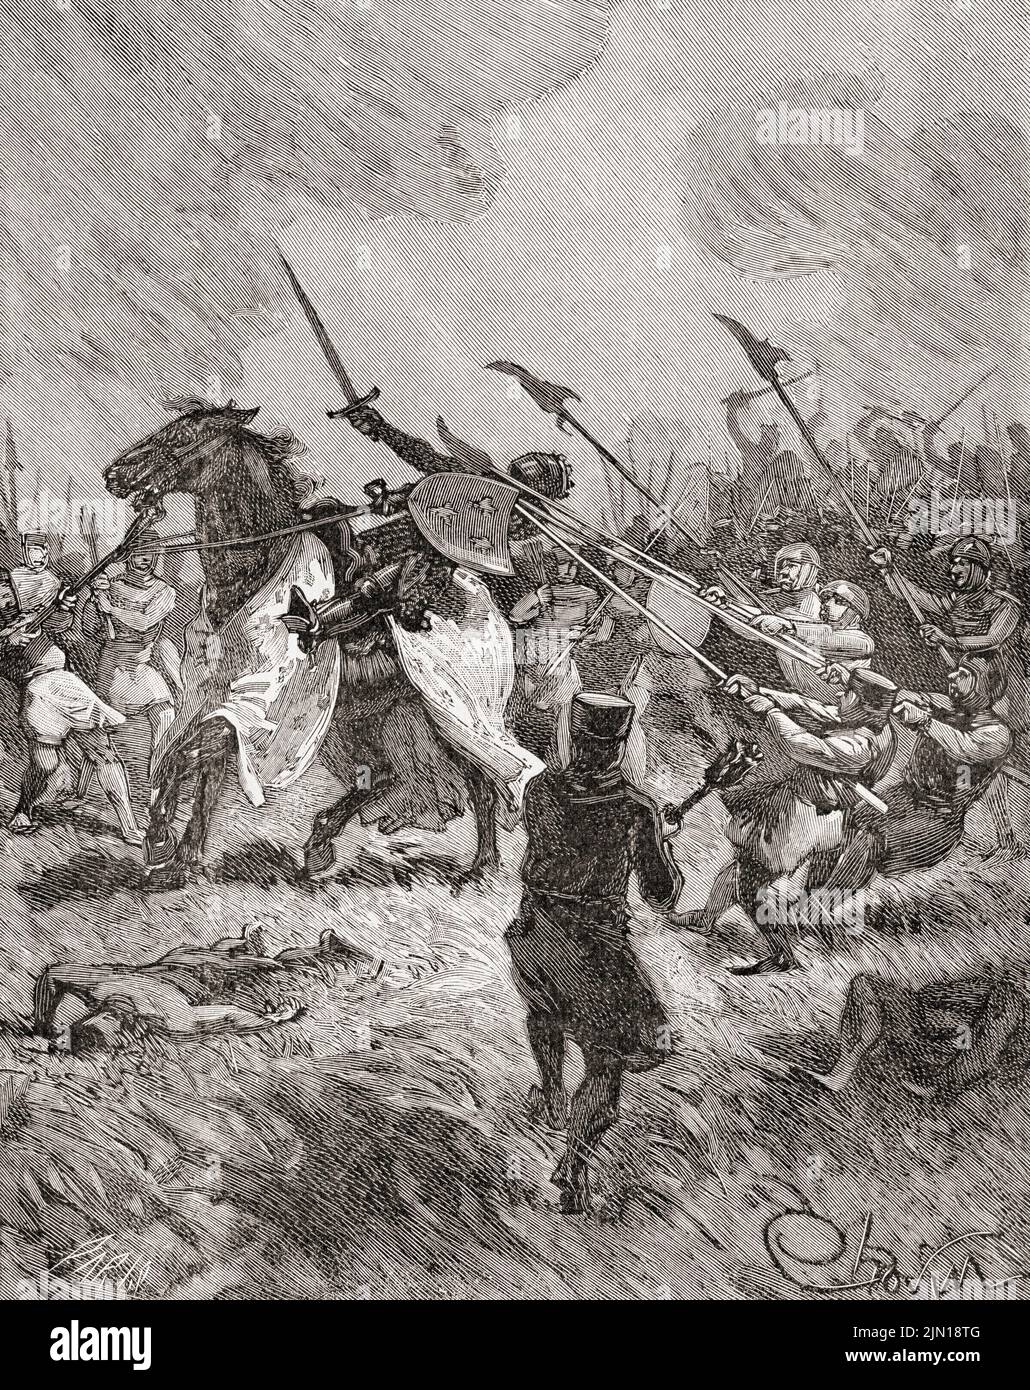 Philip II of France risking his life during the Battle of the Bouvines, 1214.  Philip II, 1165 – 1223, byname Philip Augustus.  King of France, 1180 - 1223.  From Histoire de France, published 1855. Stock Photo